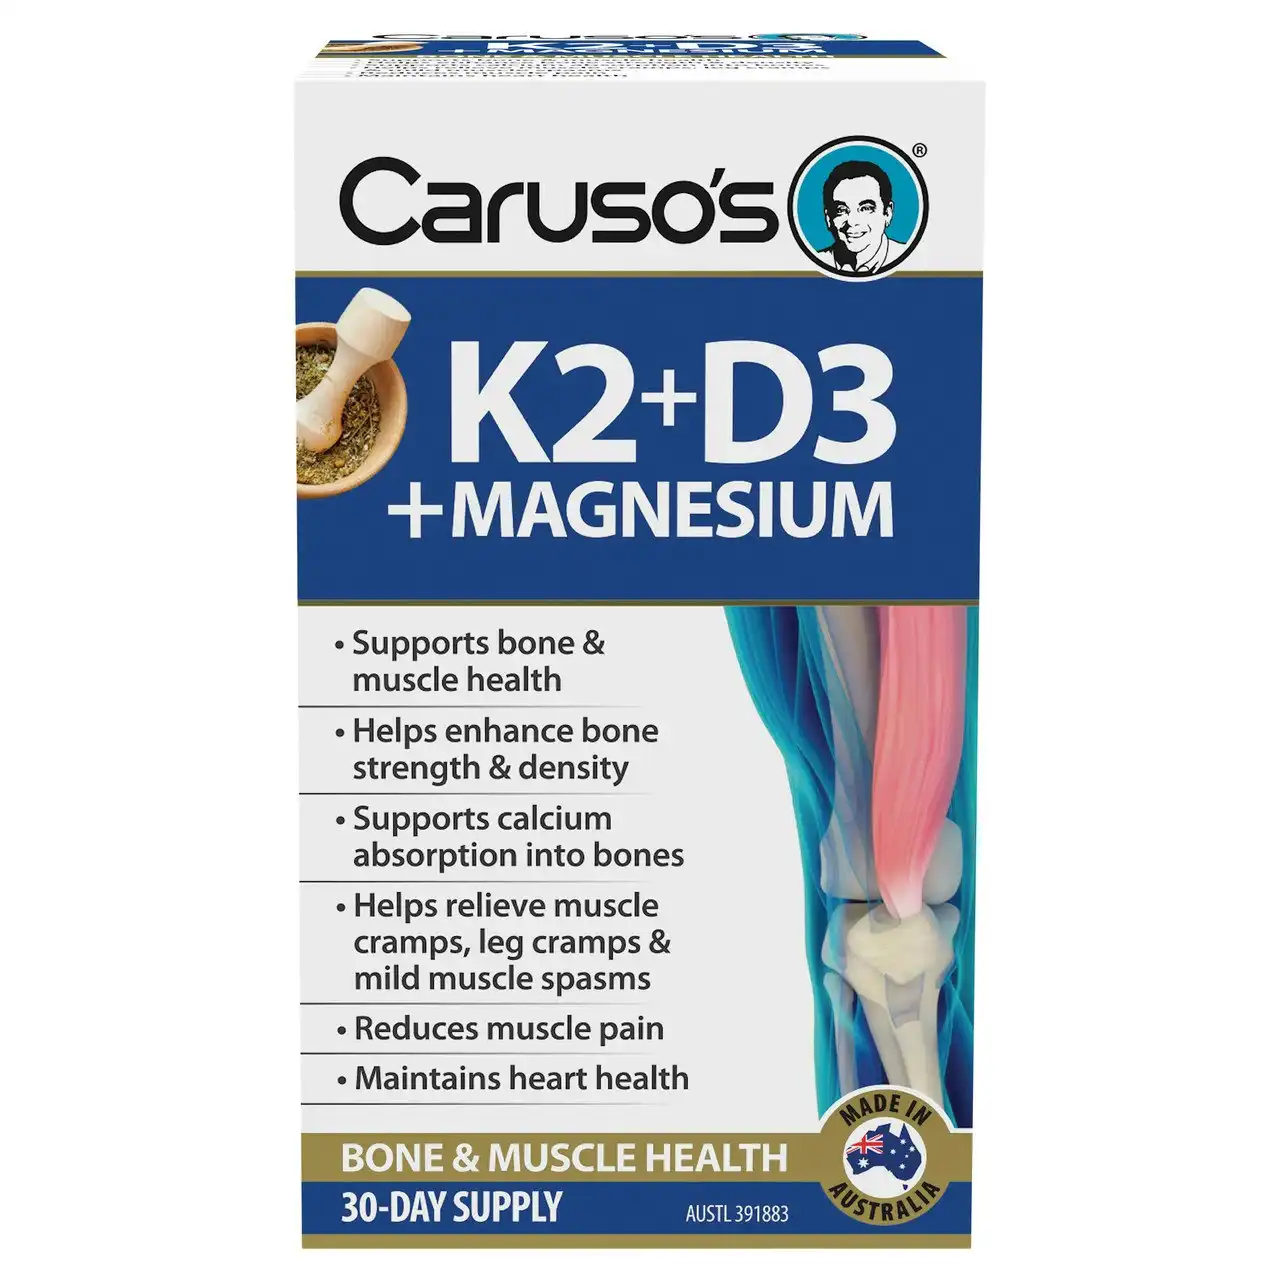 Caruso's K2 + D3 + Magnesium 30-Day Supply